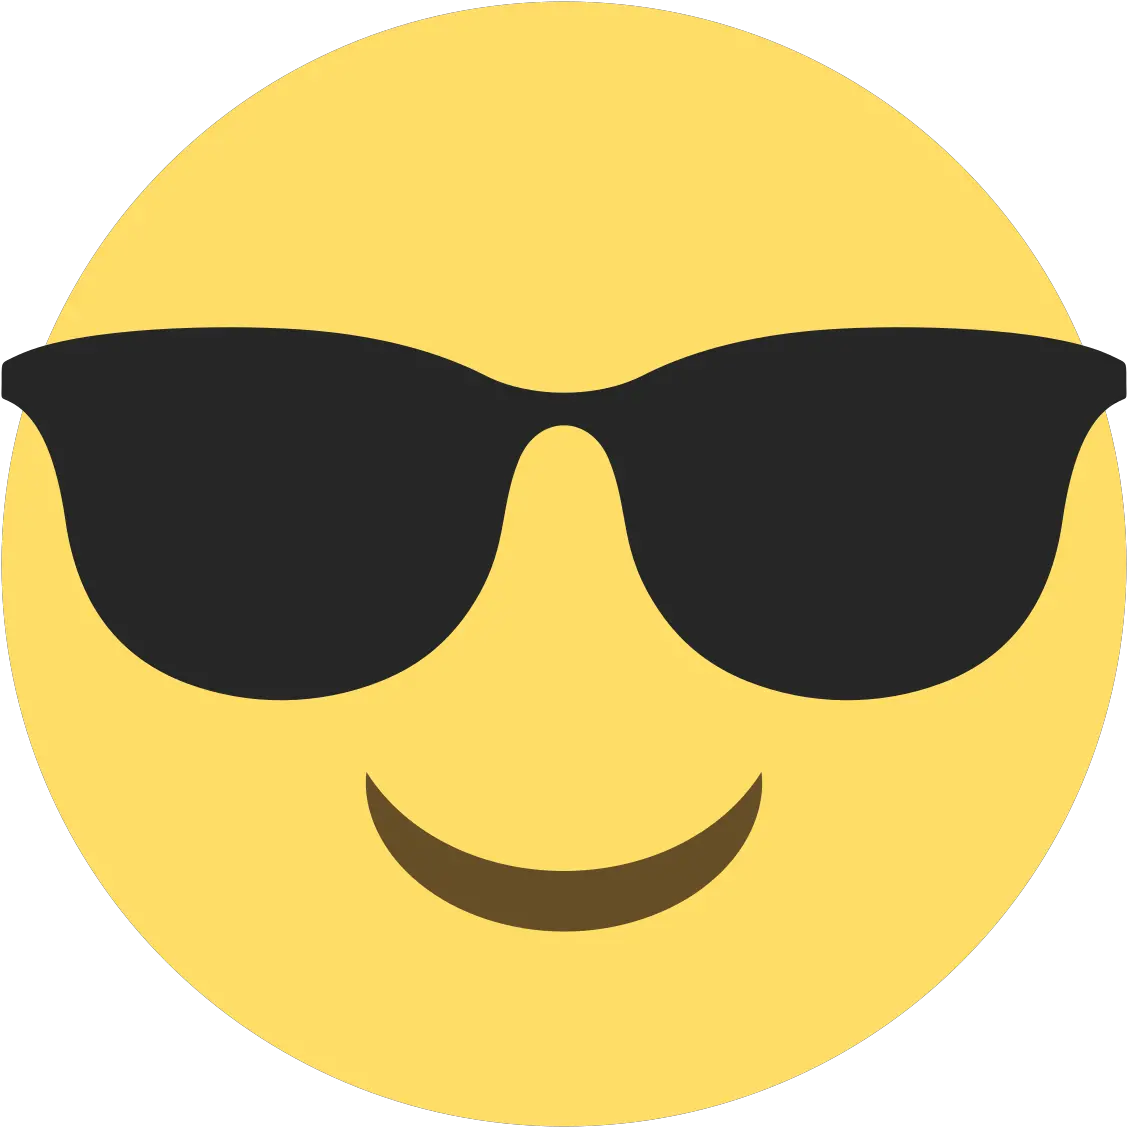 Emoticon Of Blushing Smiley Emojipedia Face Tears Clipart Smiling Face With Sunglasses Emoji Png Blush Icon